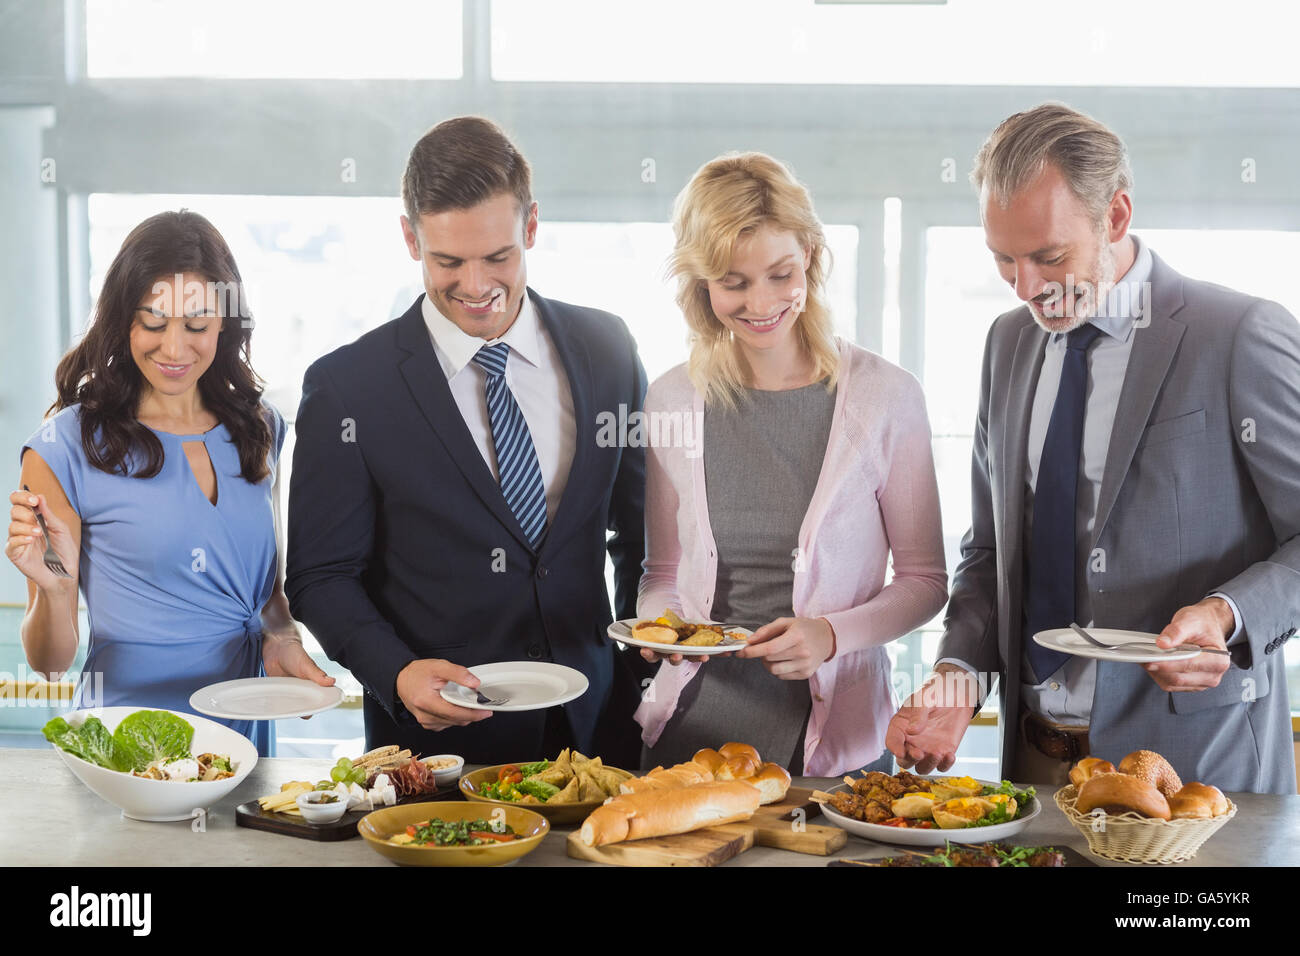 Business colleagues serving themselves at buffet lunch Stock Photo